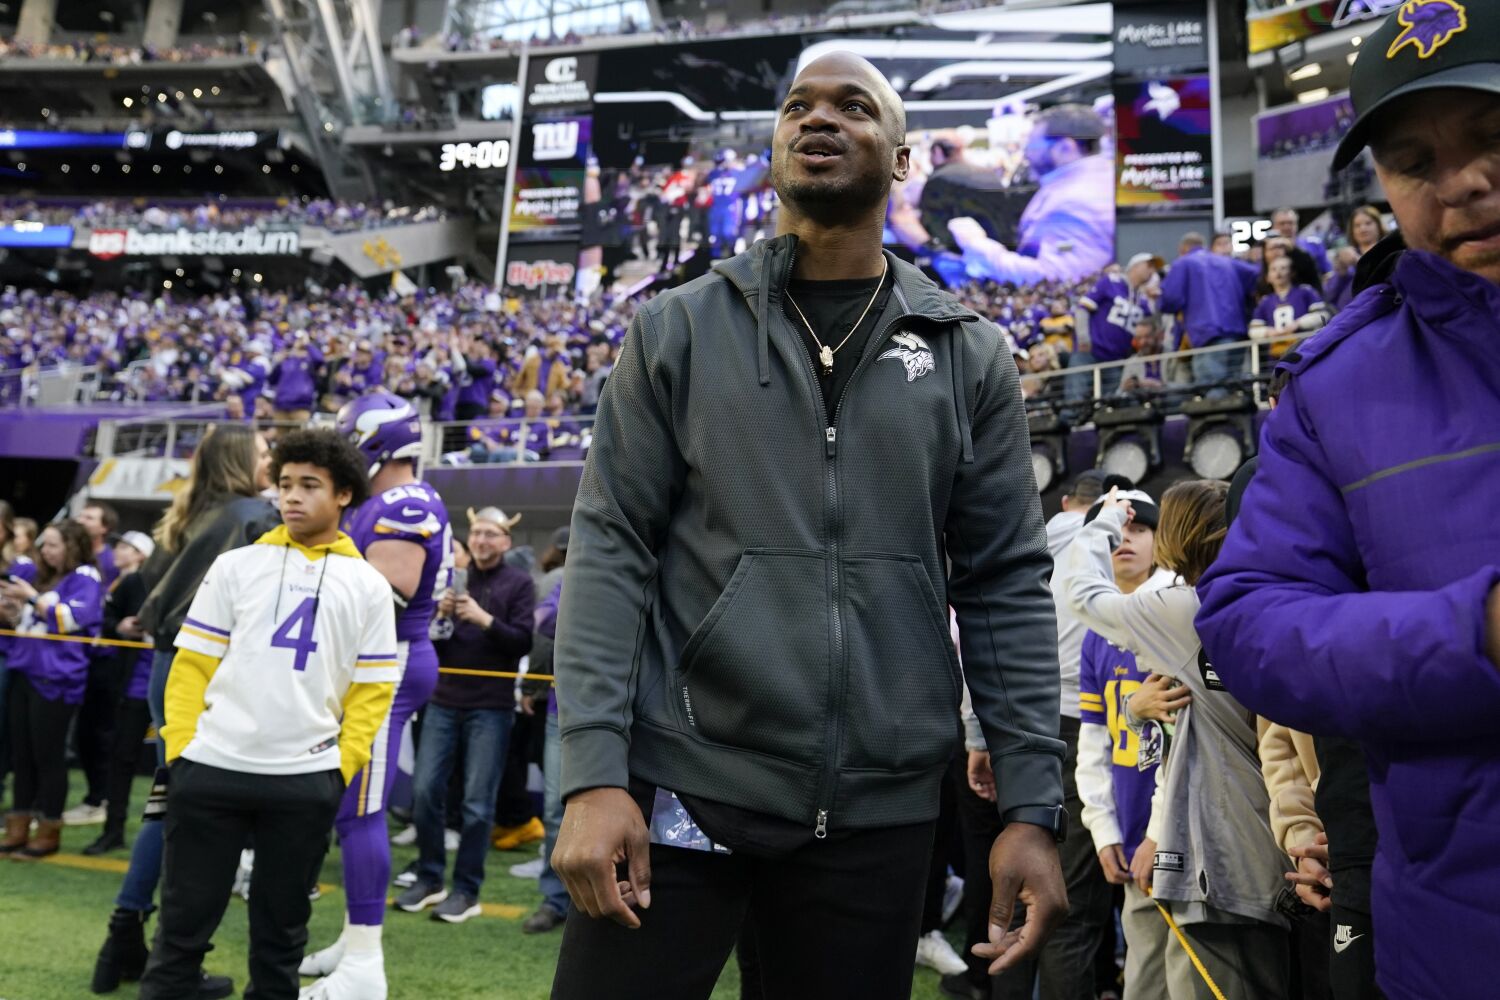 Adrian Peterson isn't retired yet. He's 38 and wants to play in the NFL this season